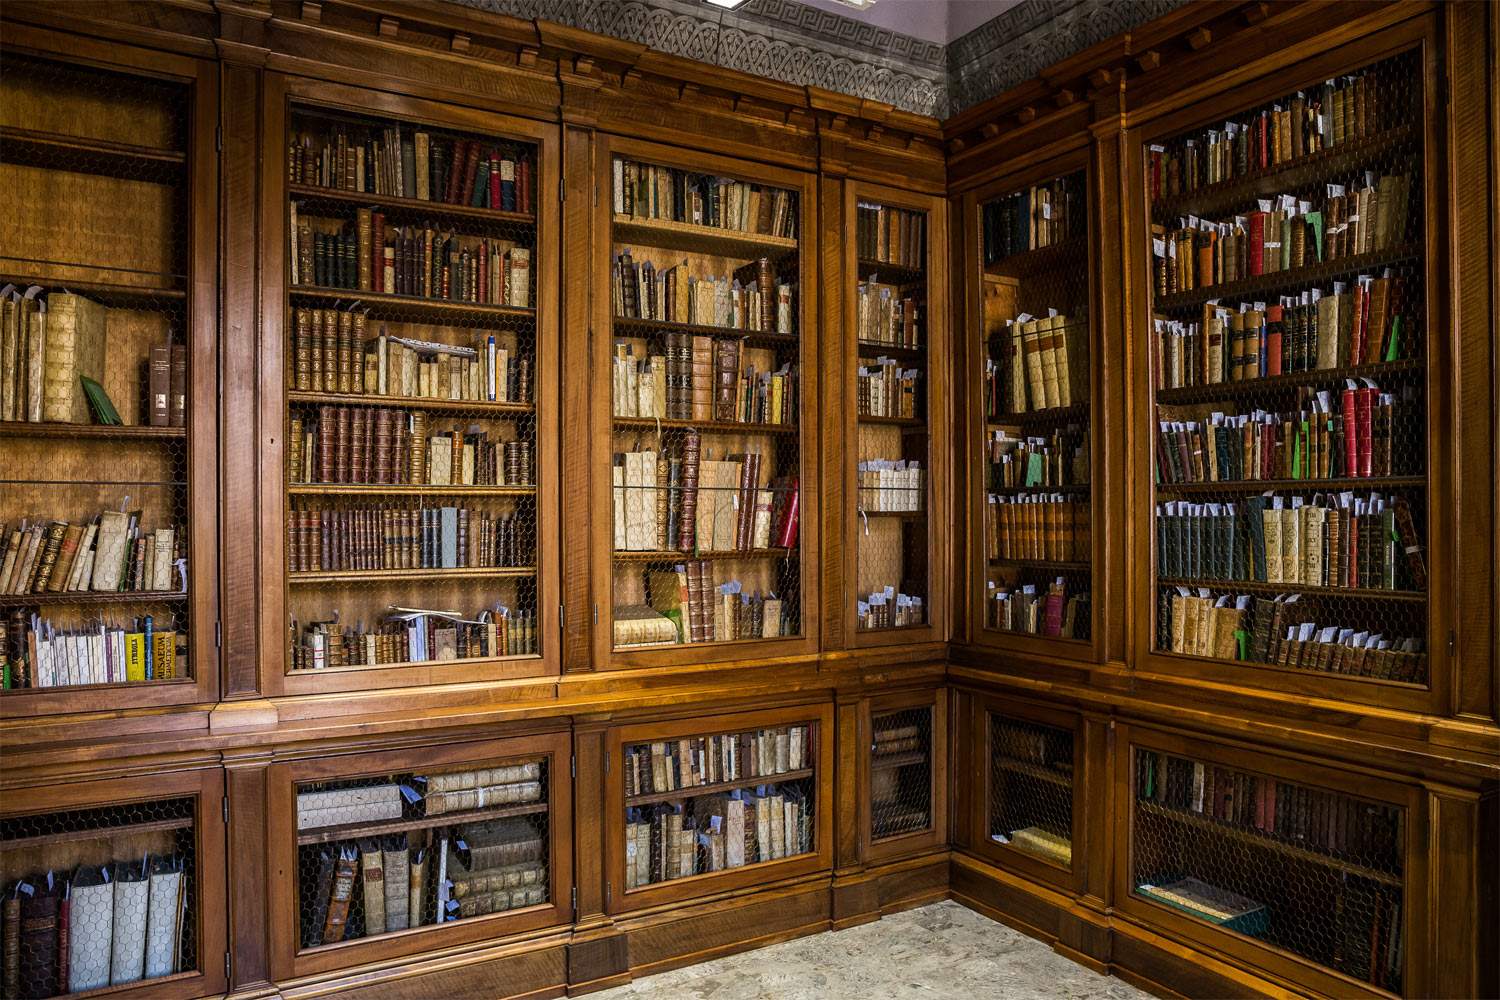 Milan, Umberto Eco's antique books on display at the Braidense. Also recreated is his Studiolo